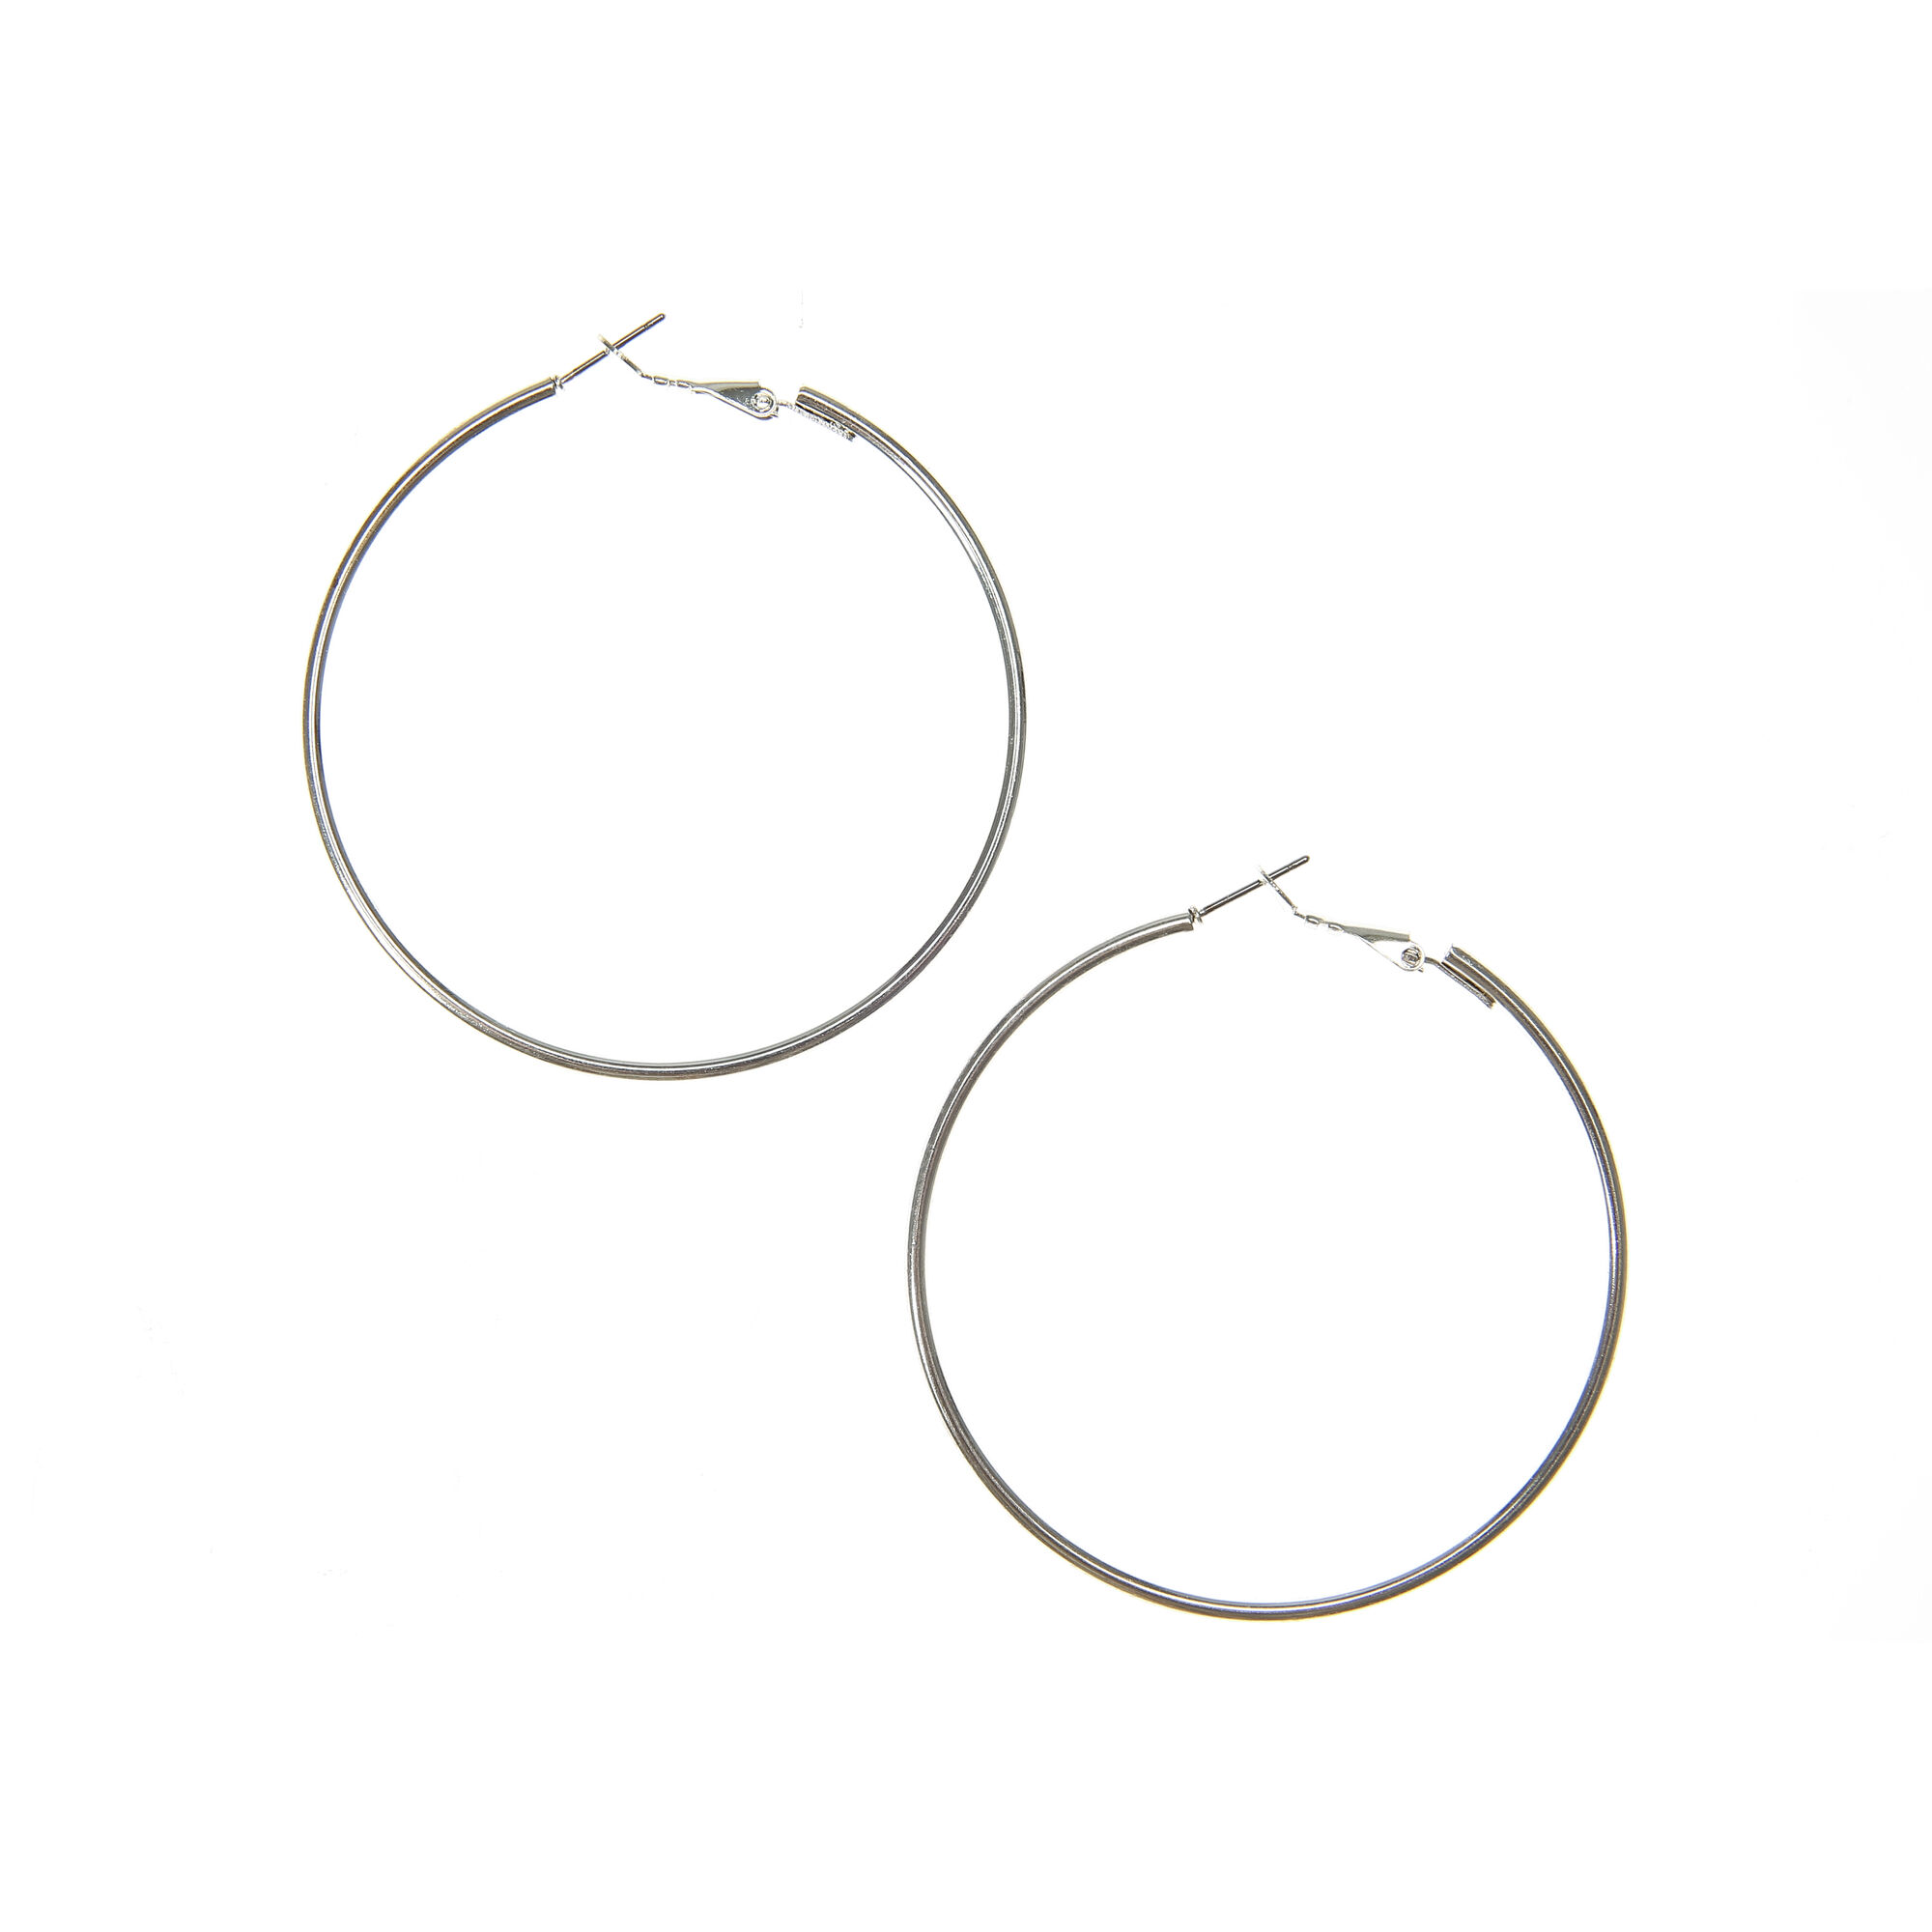 View Claires 60MM Hoop Earrings Silver information